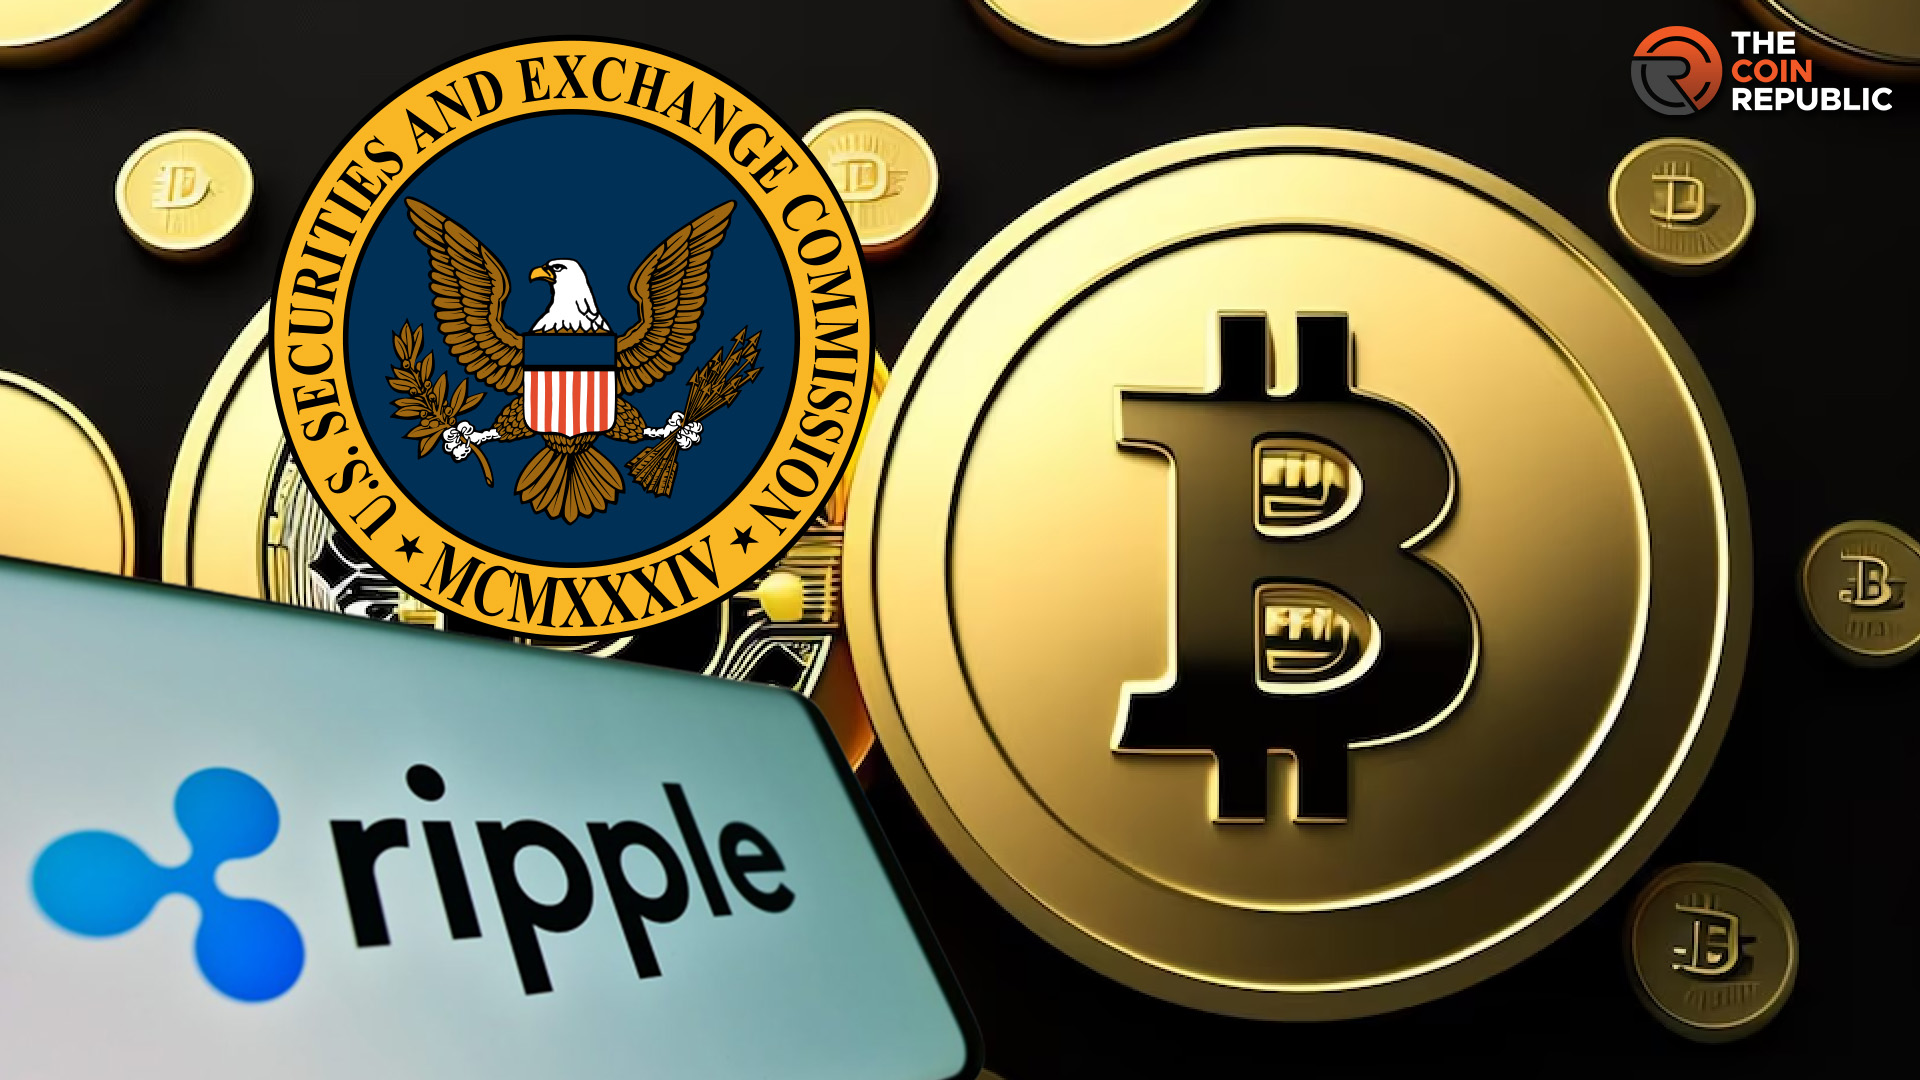 SEC vs. Ripple – The War is Not Over, Agency Plans to Appeal